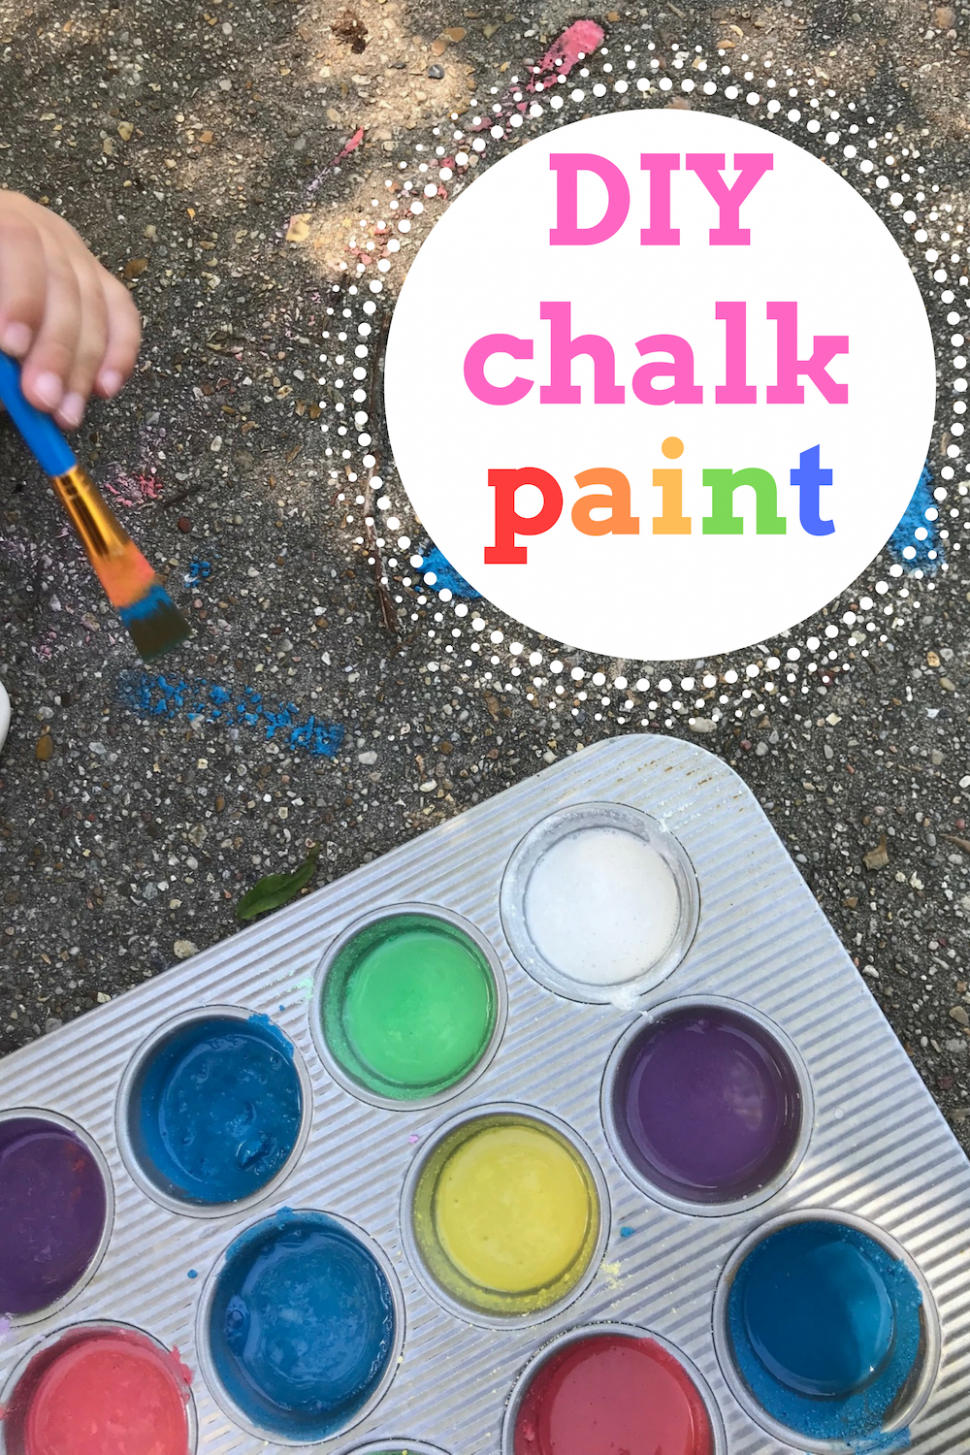 Diy Chalk Paint • Mid Century Mom Can You Mix Chalk Paint With Acrylic Paint